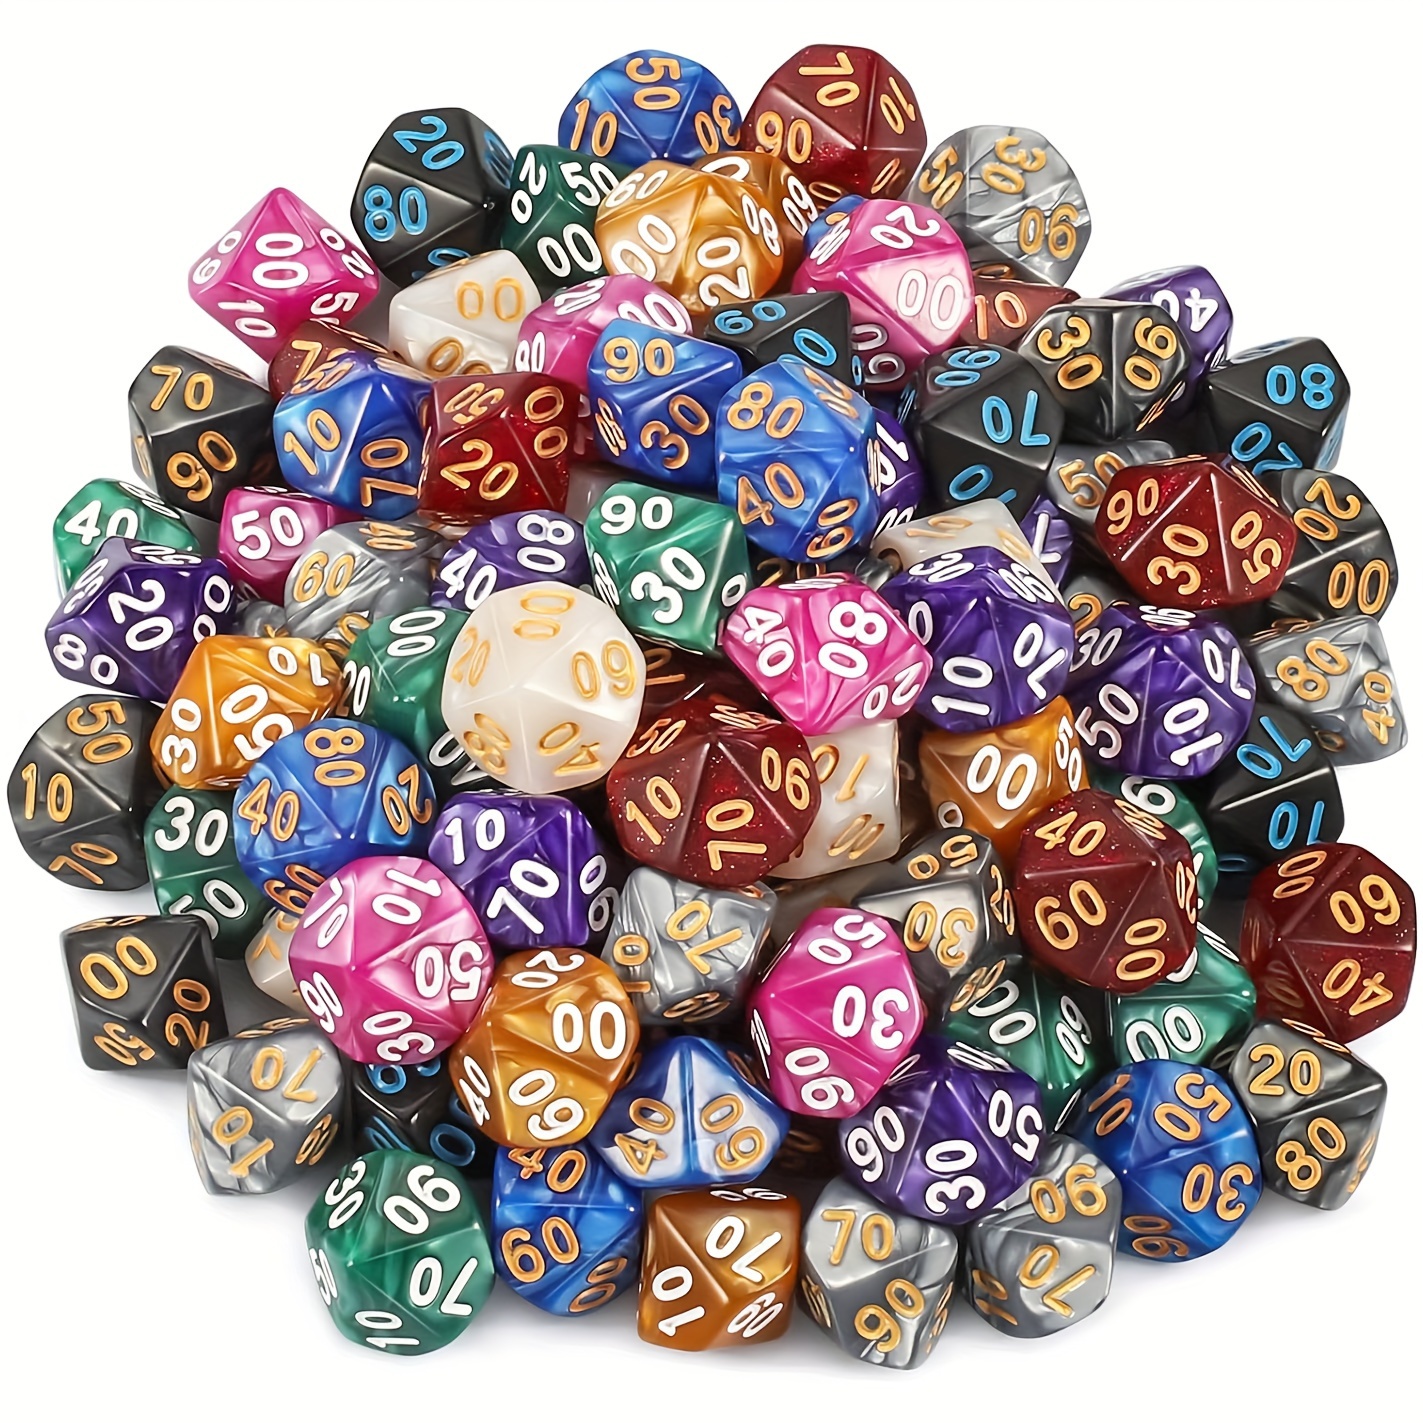 

50pcs Polyhedral Dice Set, 00-90 Dice Compatible With Rpg Mtg And Other Table Games With Random Multi Colored Assortment (random Color, D10)